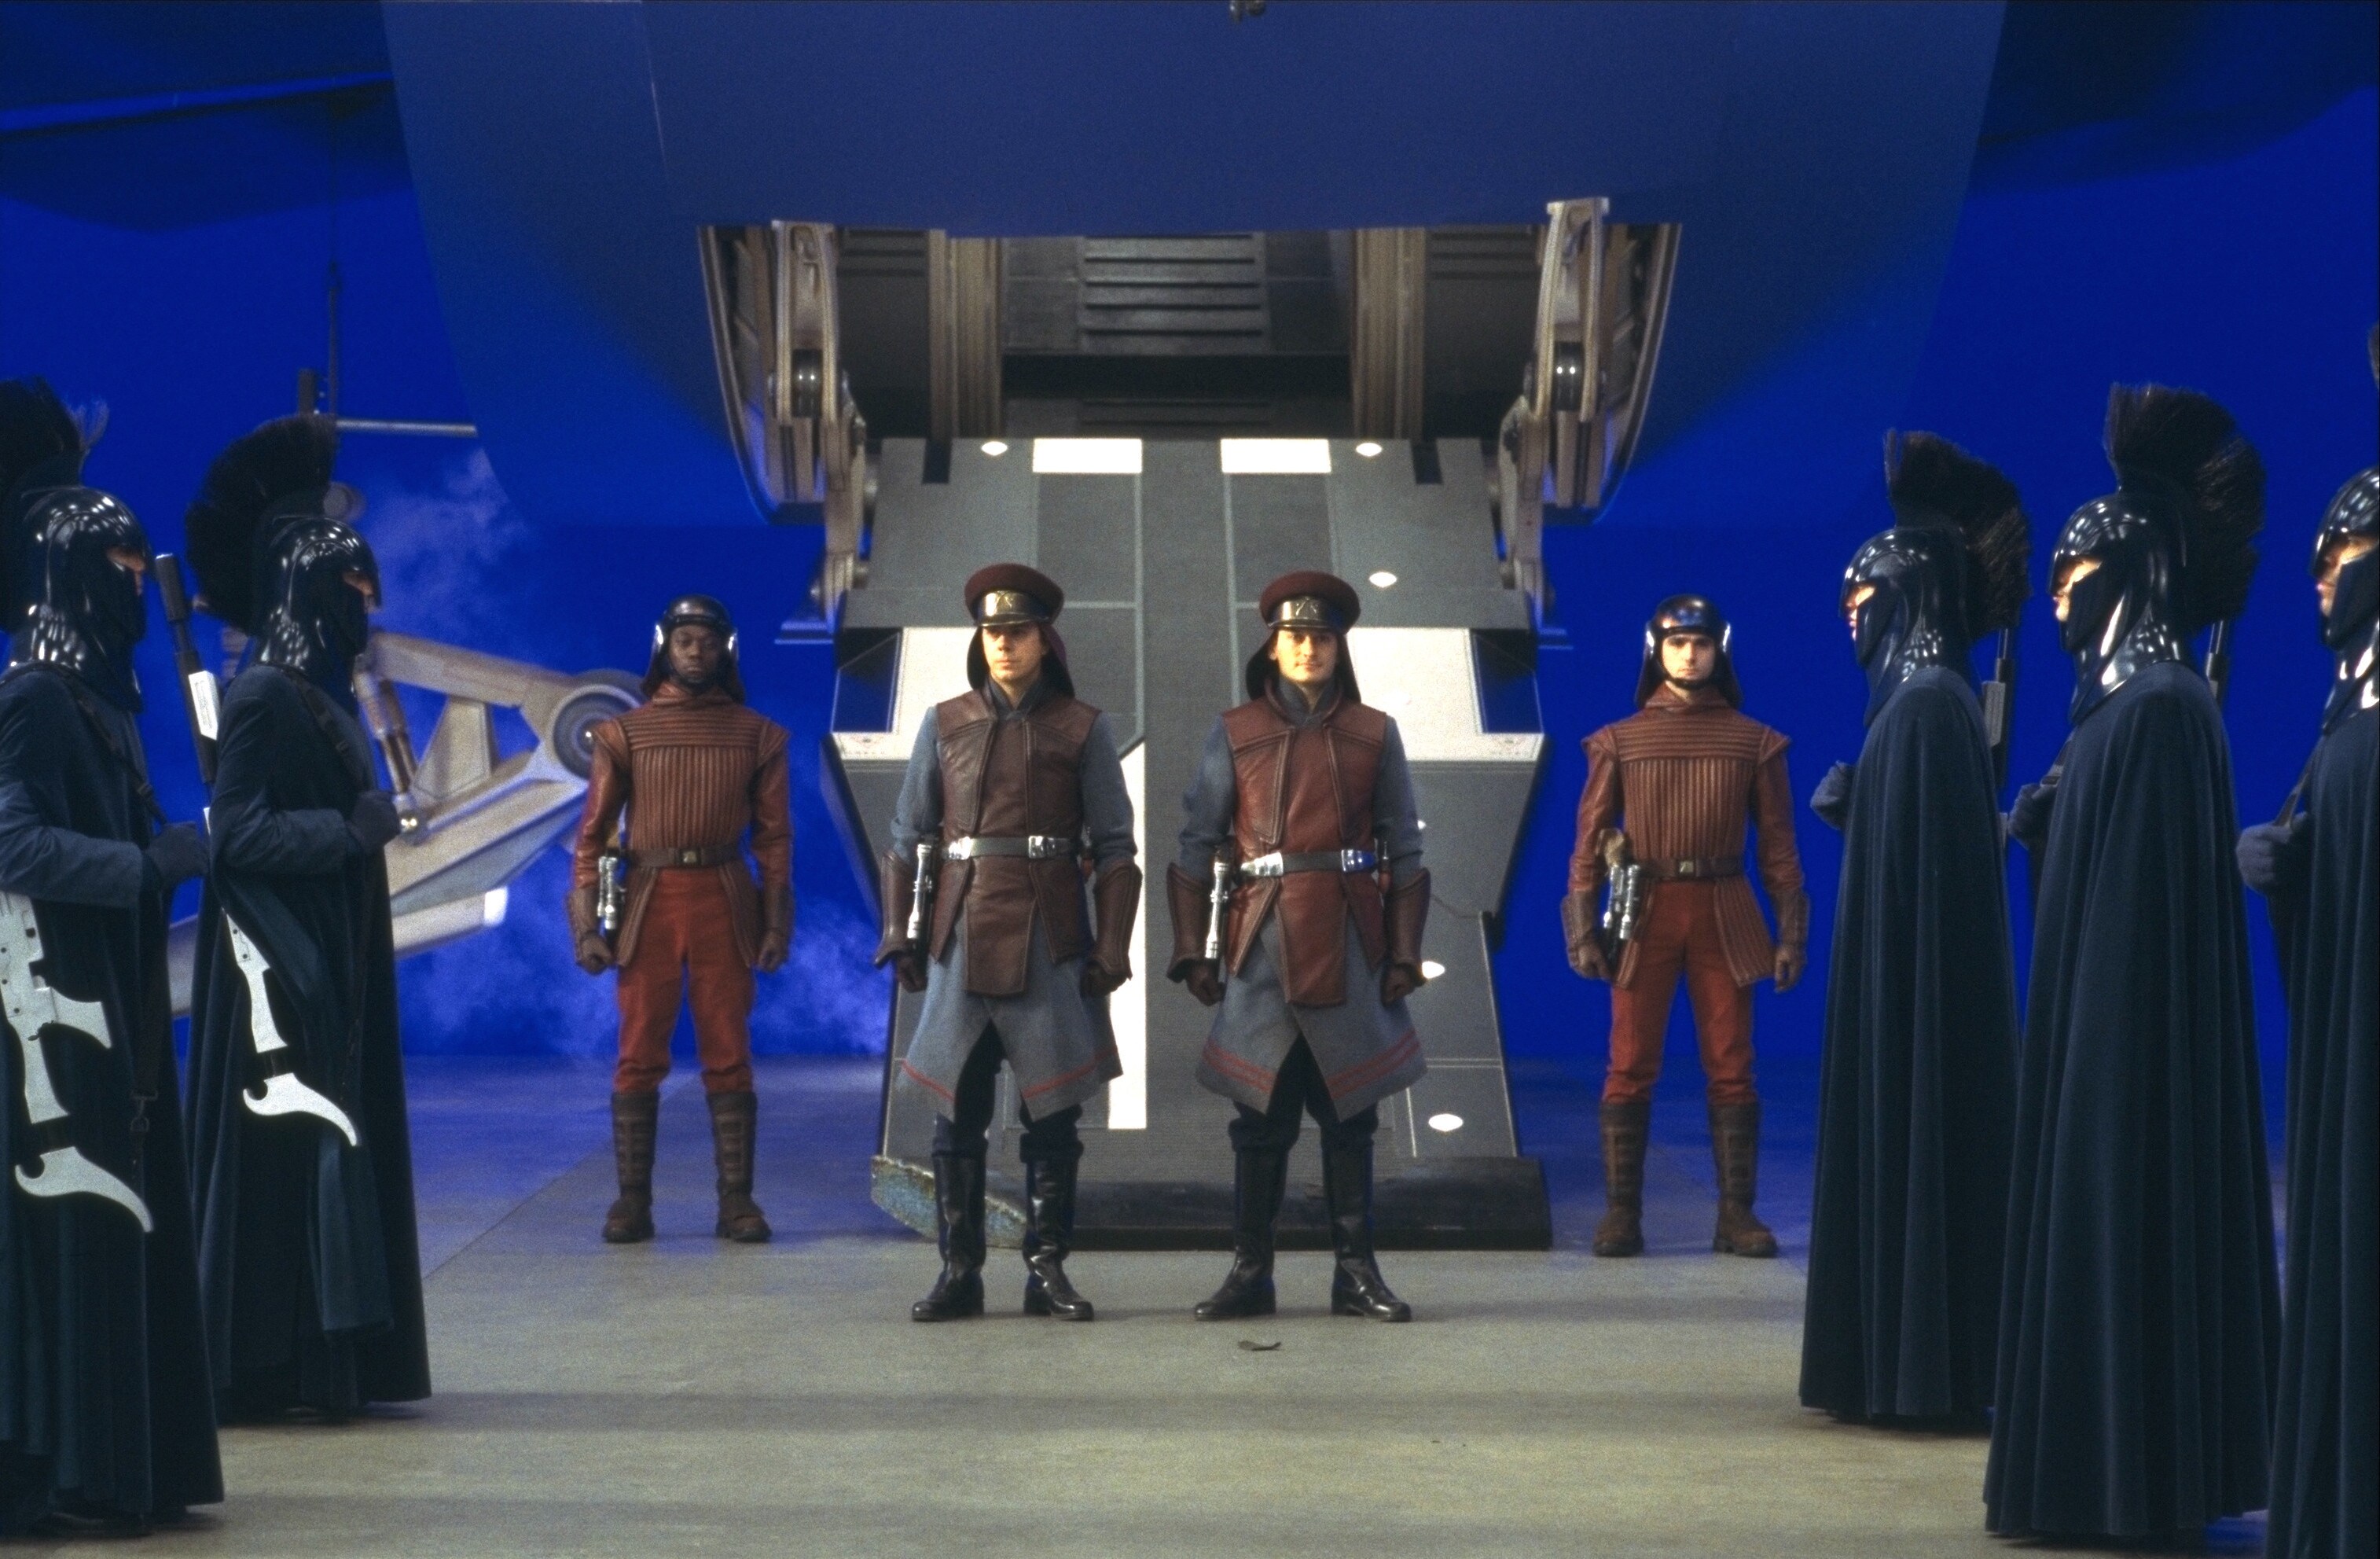 Security protects the entrance ramp to the Naboo Royal Starship. The ship and background, shot on...